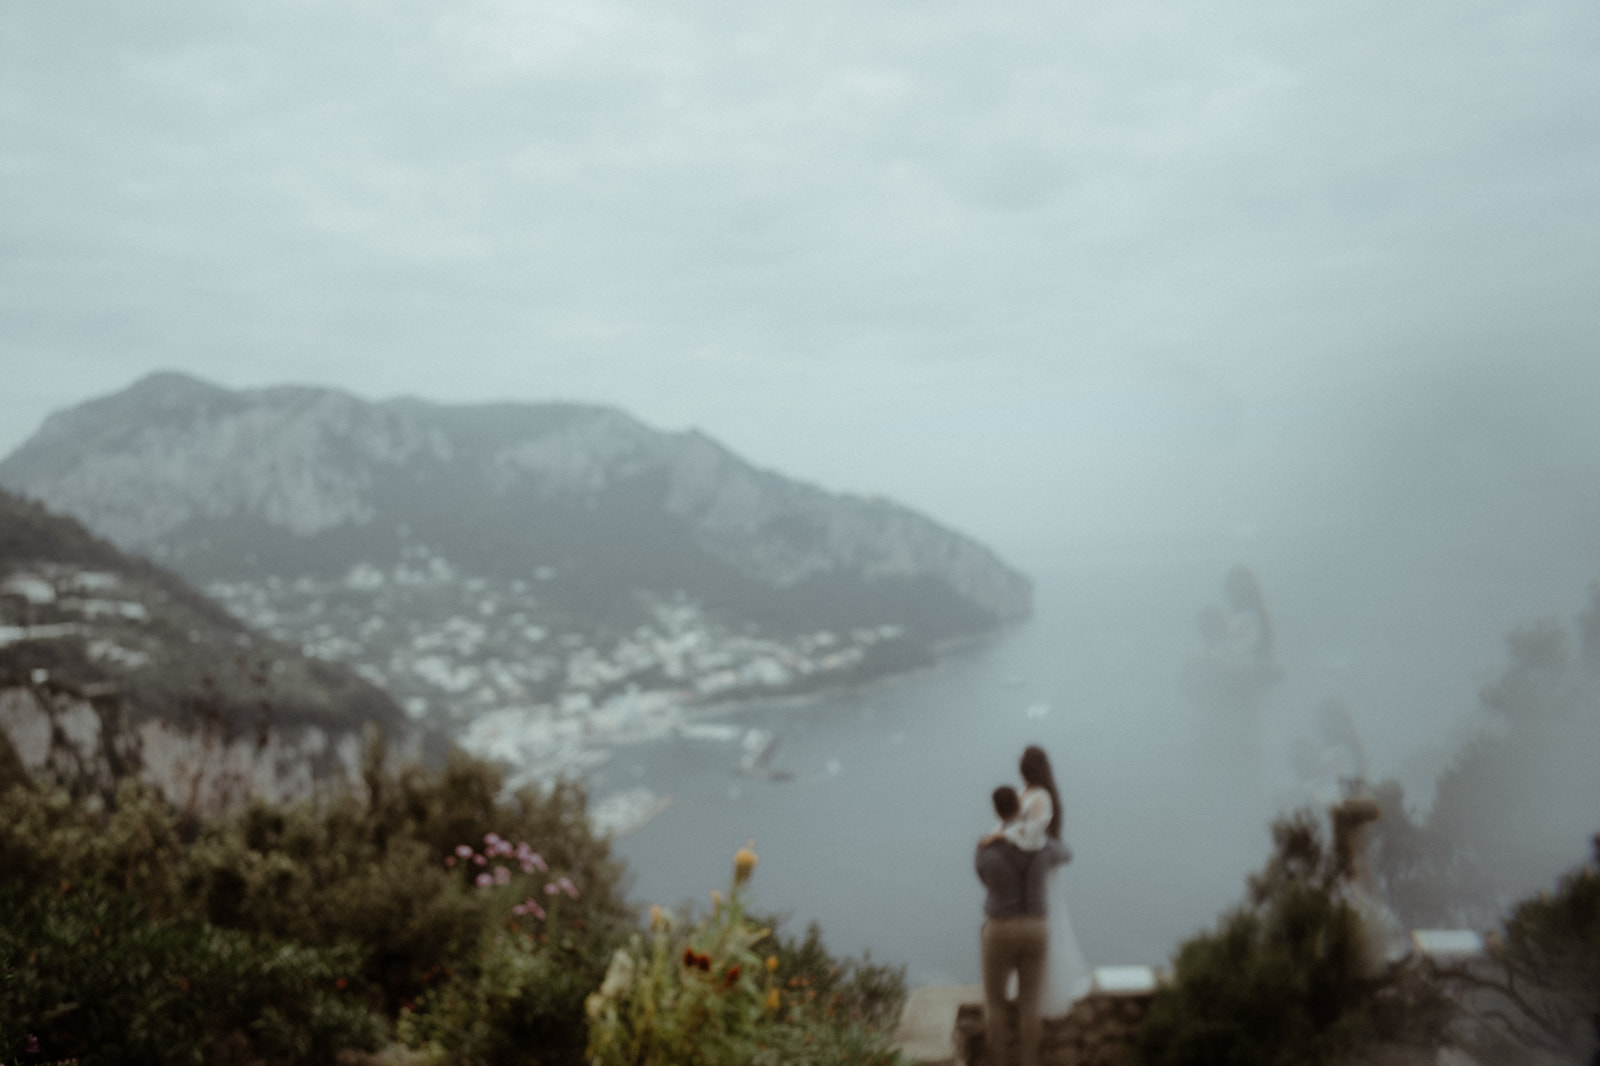 Couple photos at a wedding on the island of Capri and the sea in the background